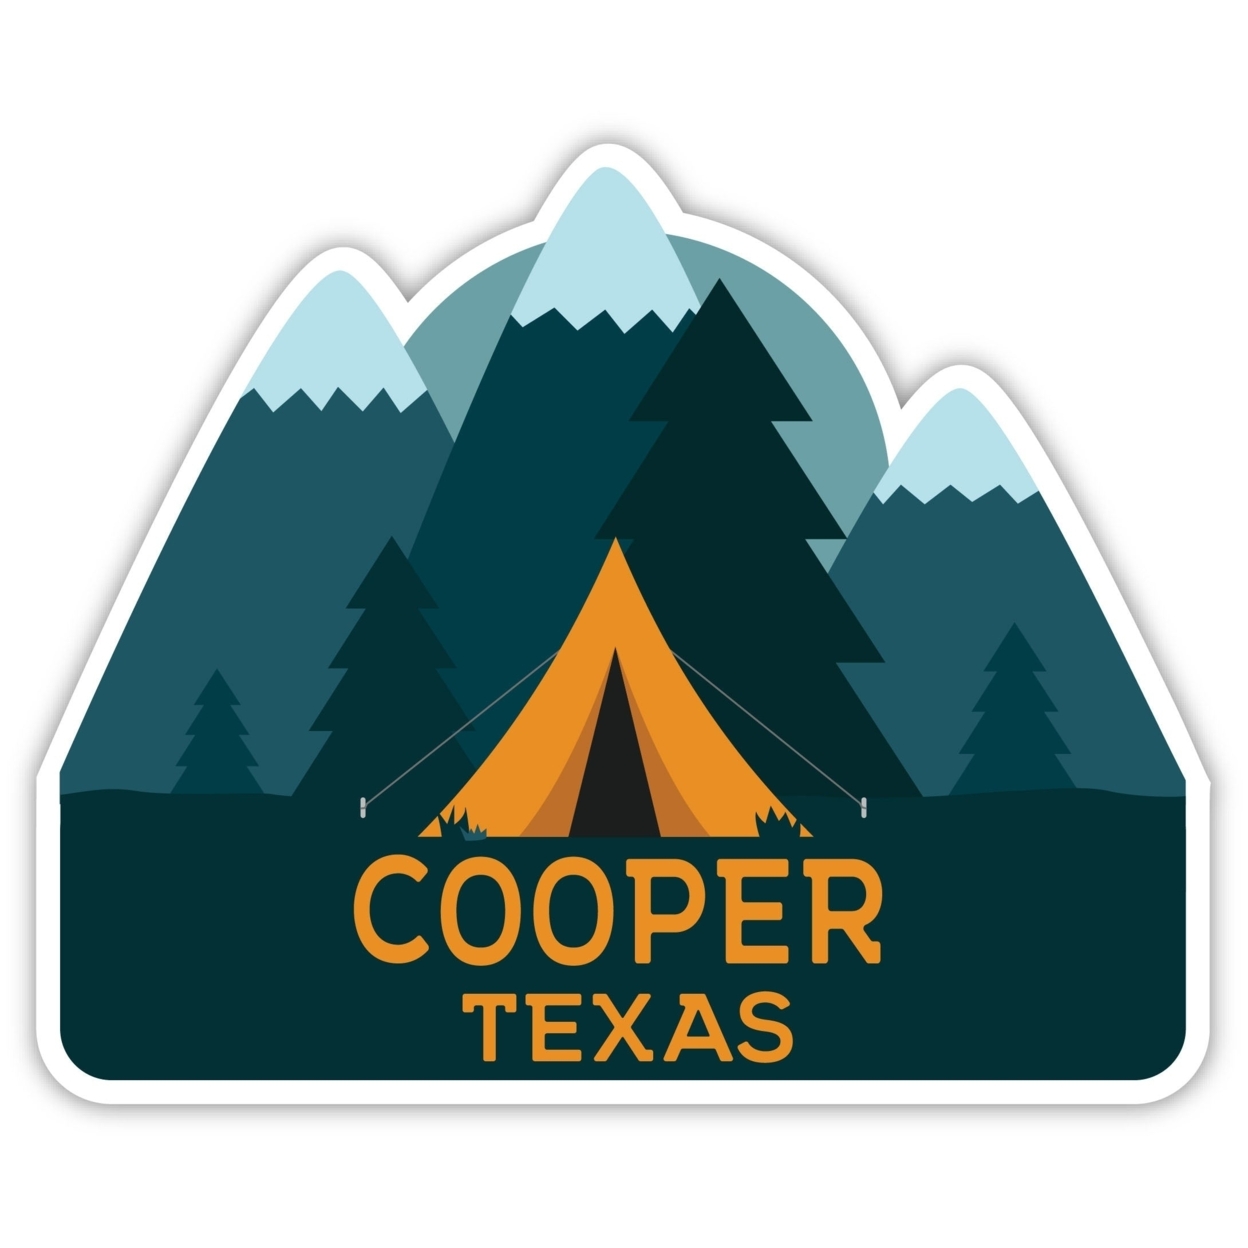 Cooper Texas Souvenir Decorative Stickers (Choose Theme And Size) - 4-Pack, 4-Inch, Tent